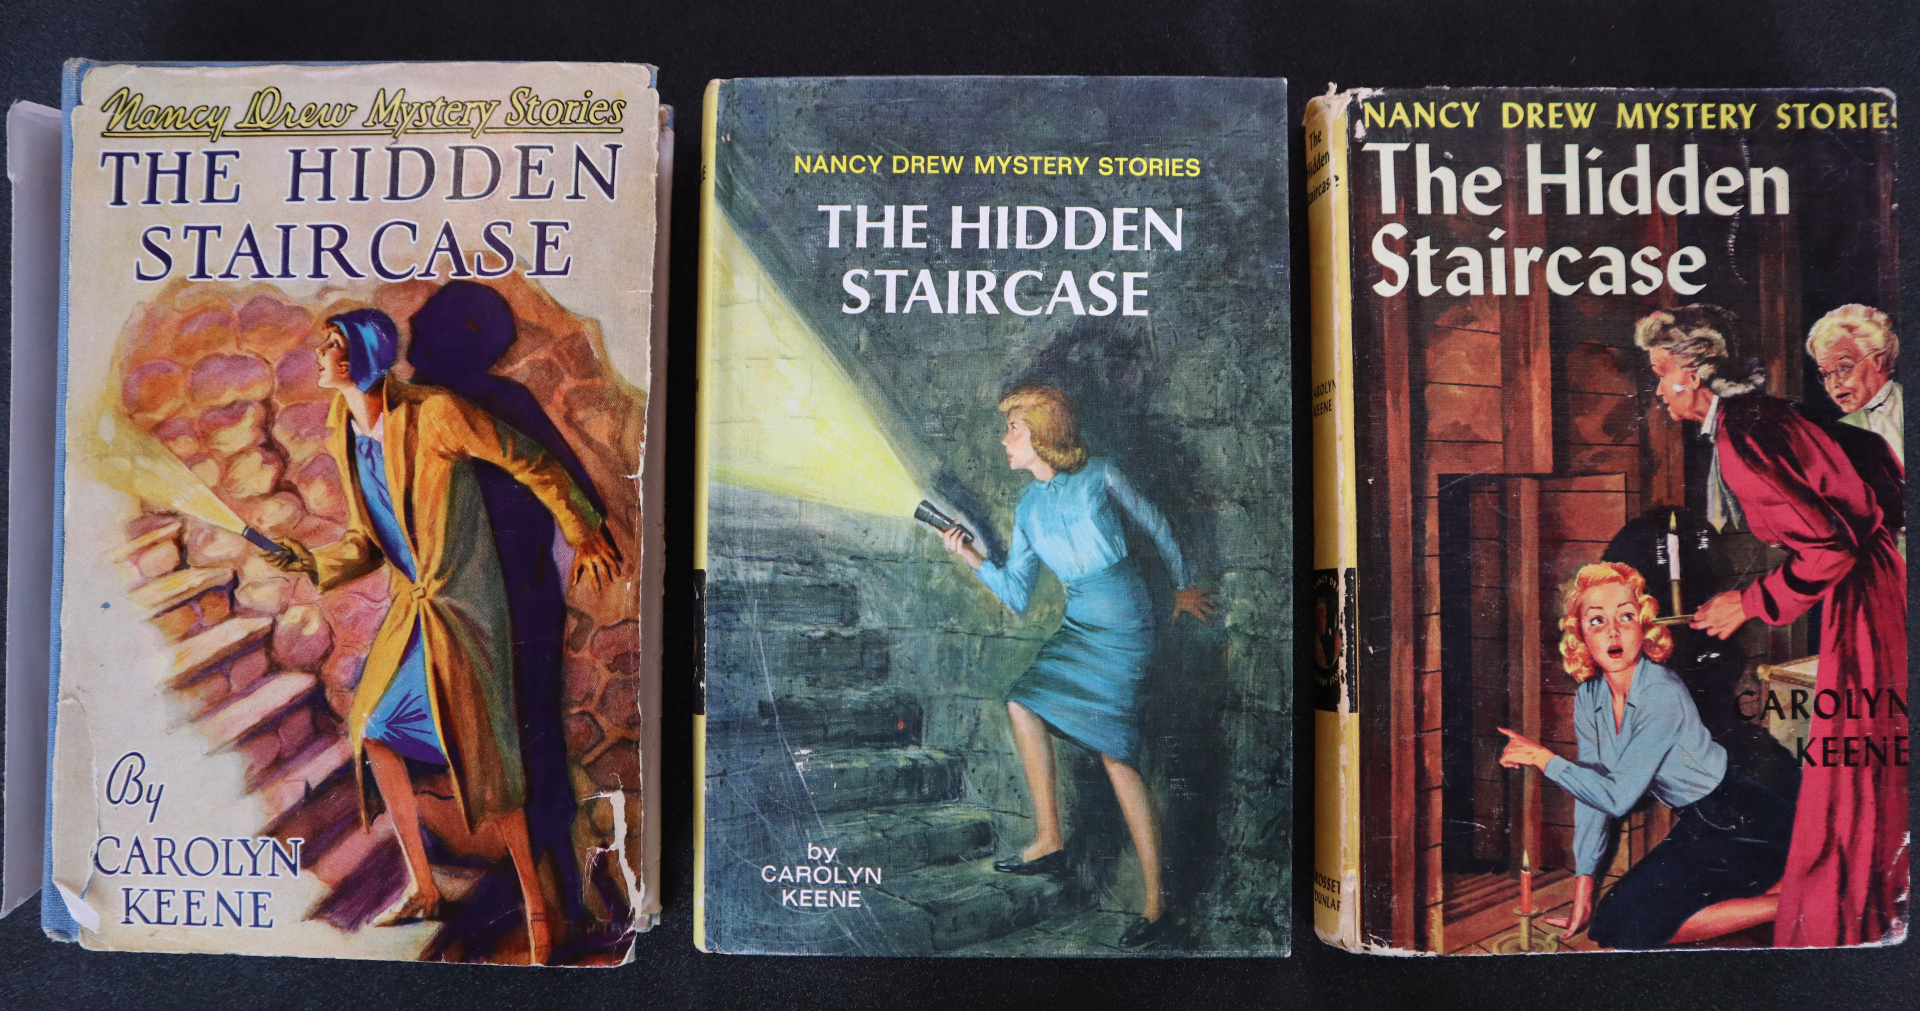 Covers of the Nancy Drew Mystery "The Hidden Staircase"